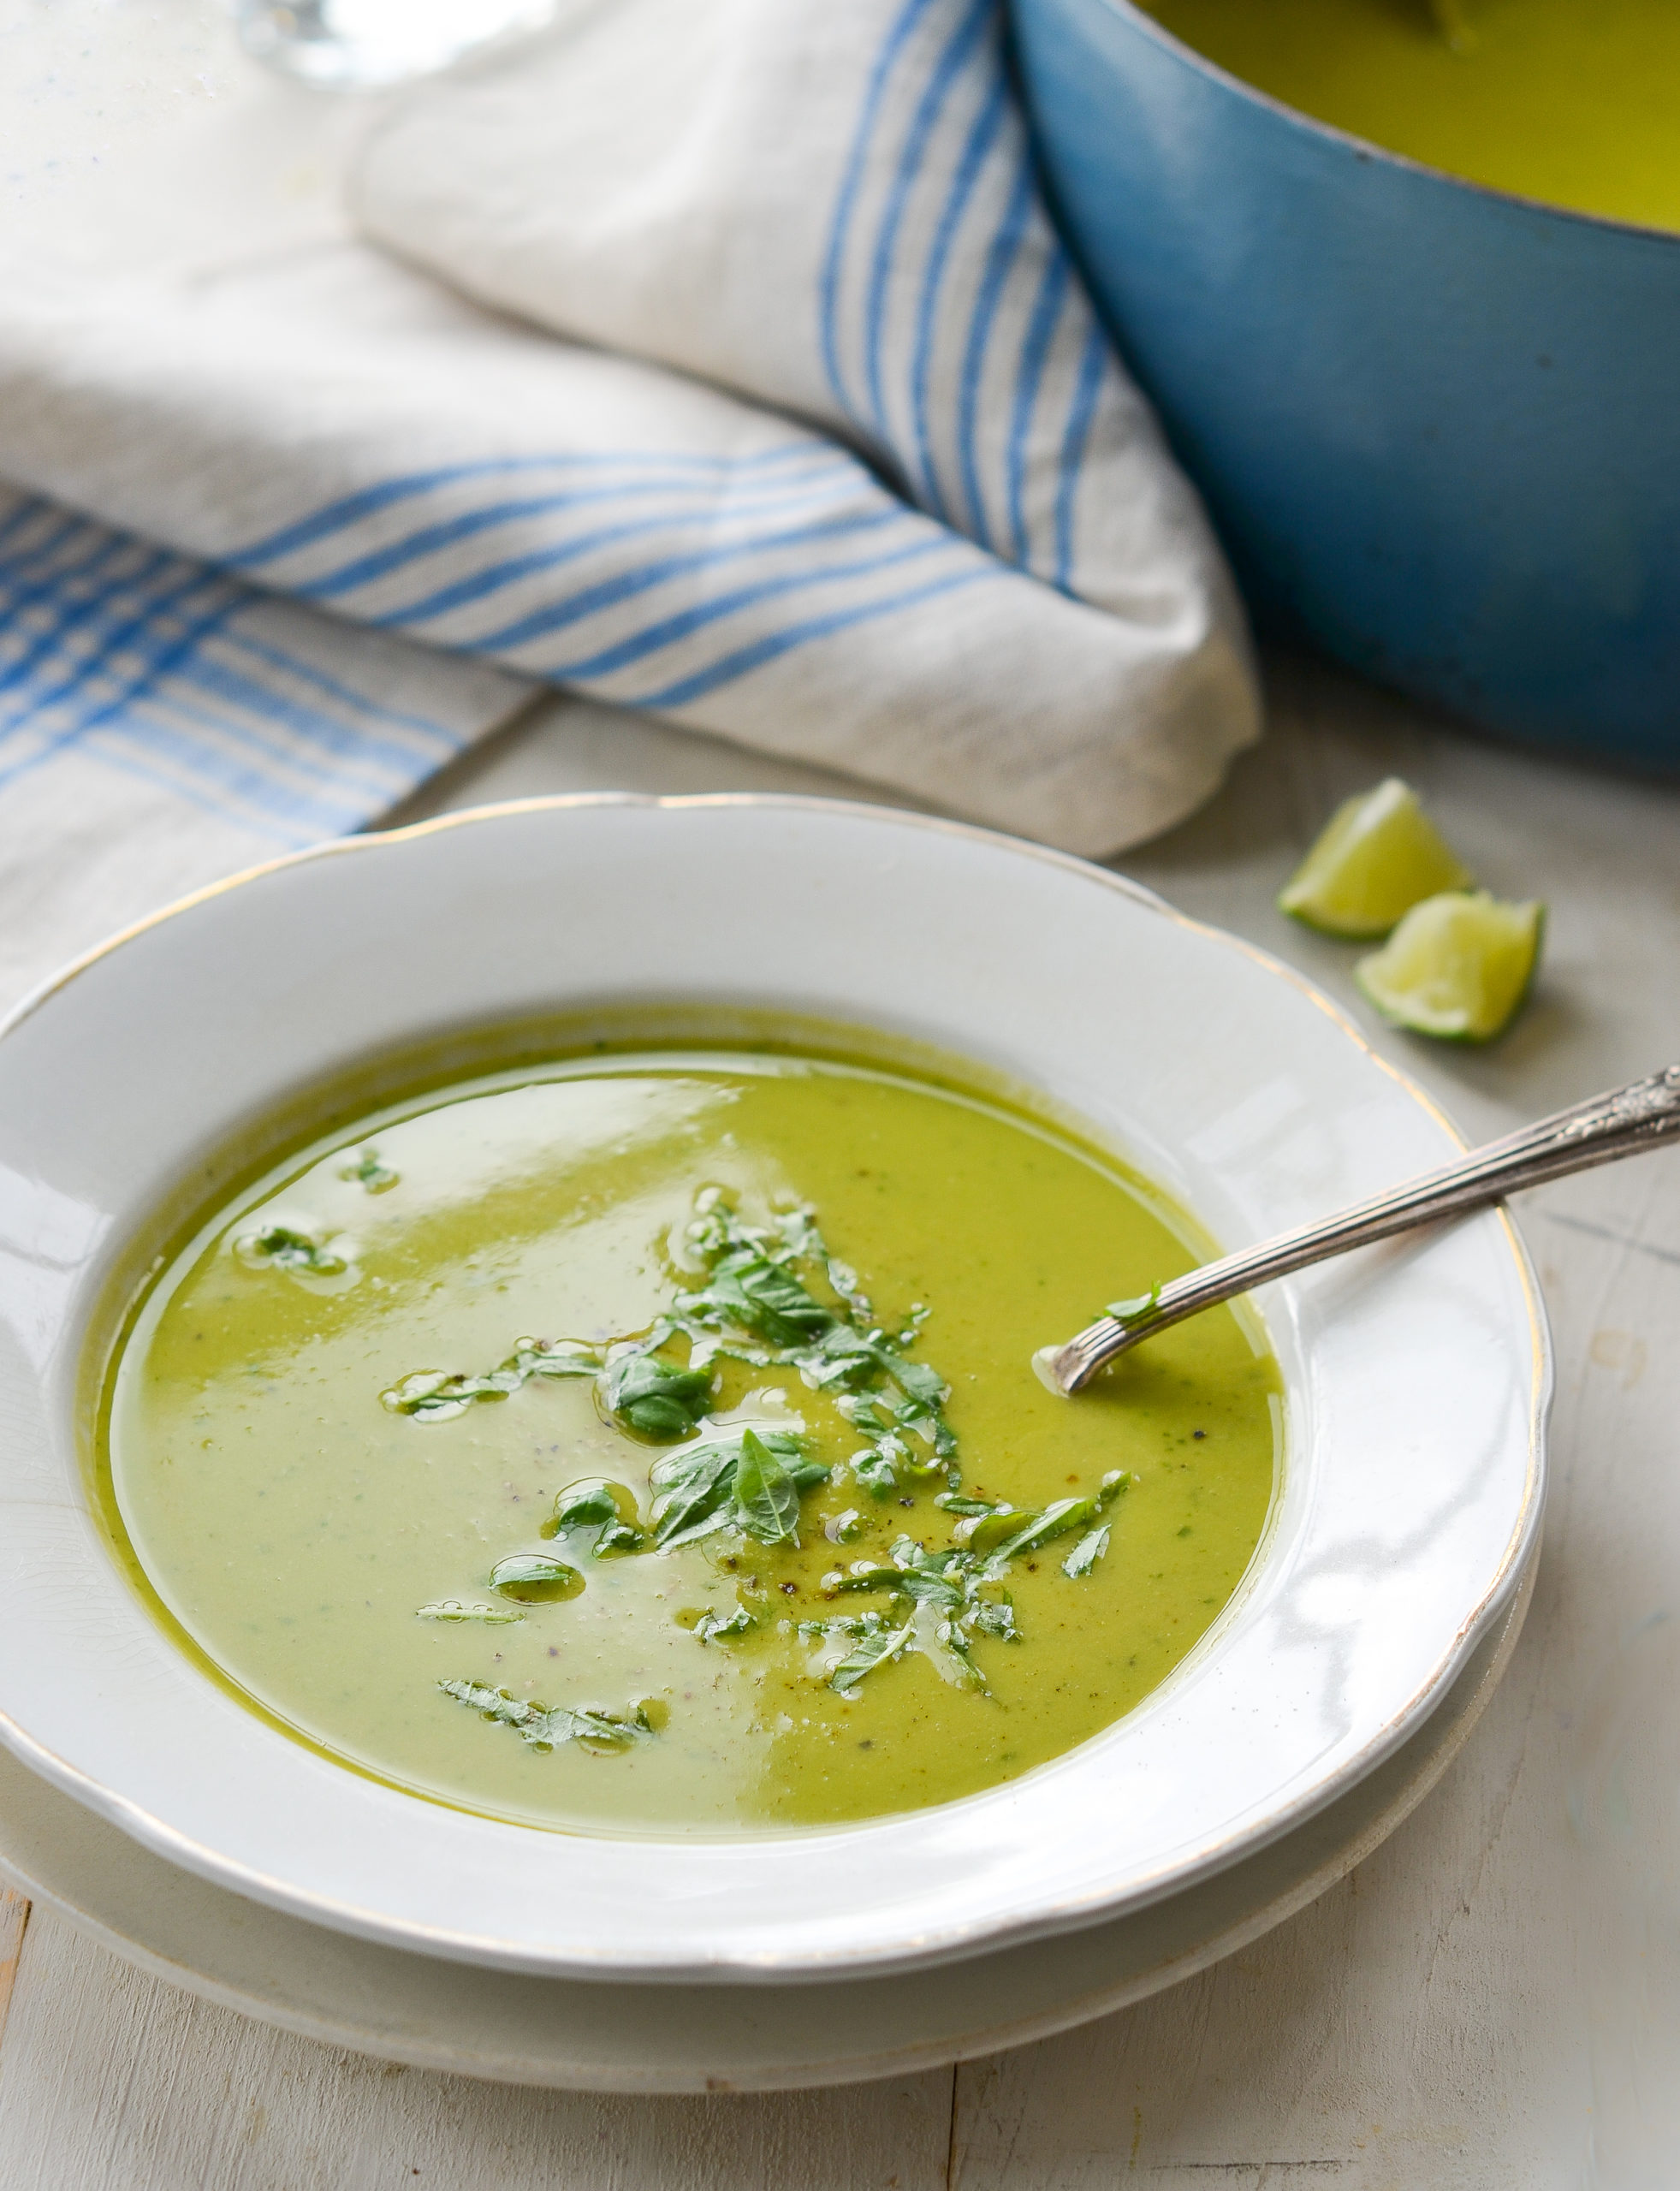 https://www.onceuponachef.com/images/2010/04/Pea-Soup-with-Basil-scaled.jpg